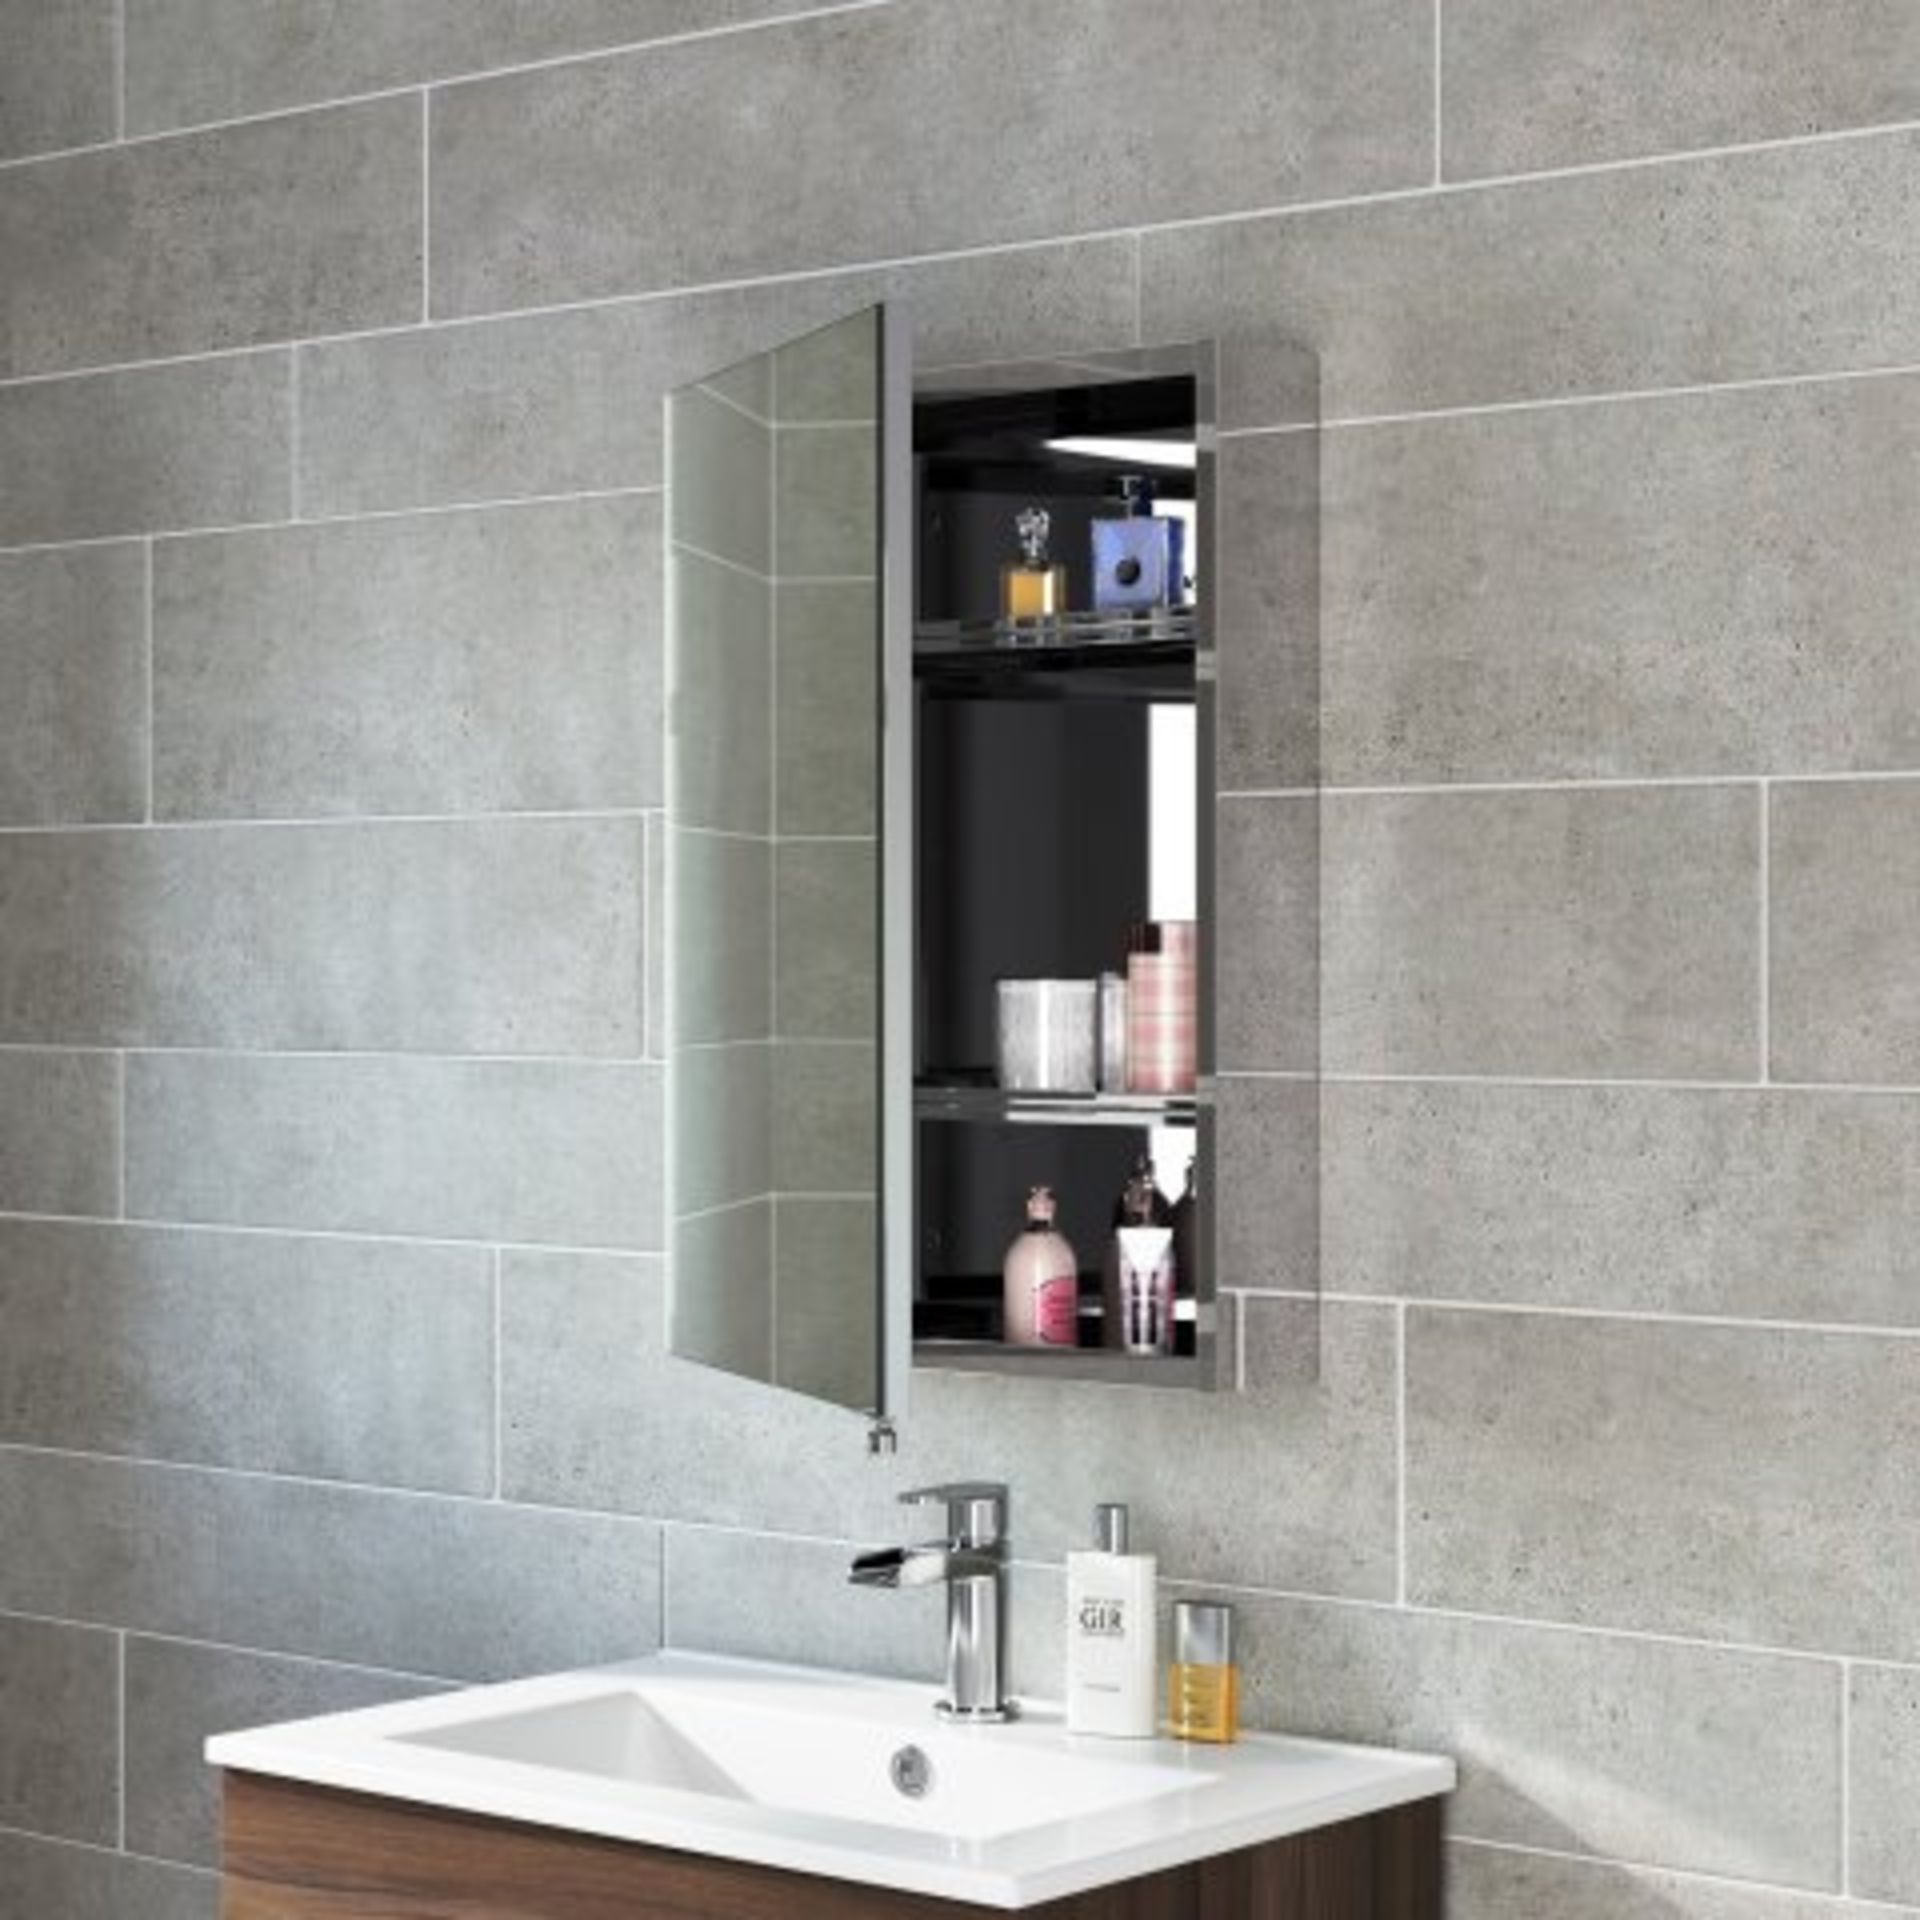 (N220) 600x400mm Liberty Stainless Steel Single Door Mirror Cabinet RRP £249.99 Perfect Reflection - Image 3 of 4